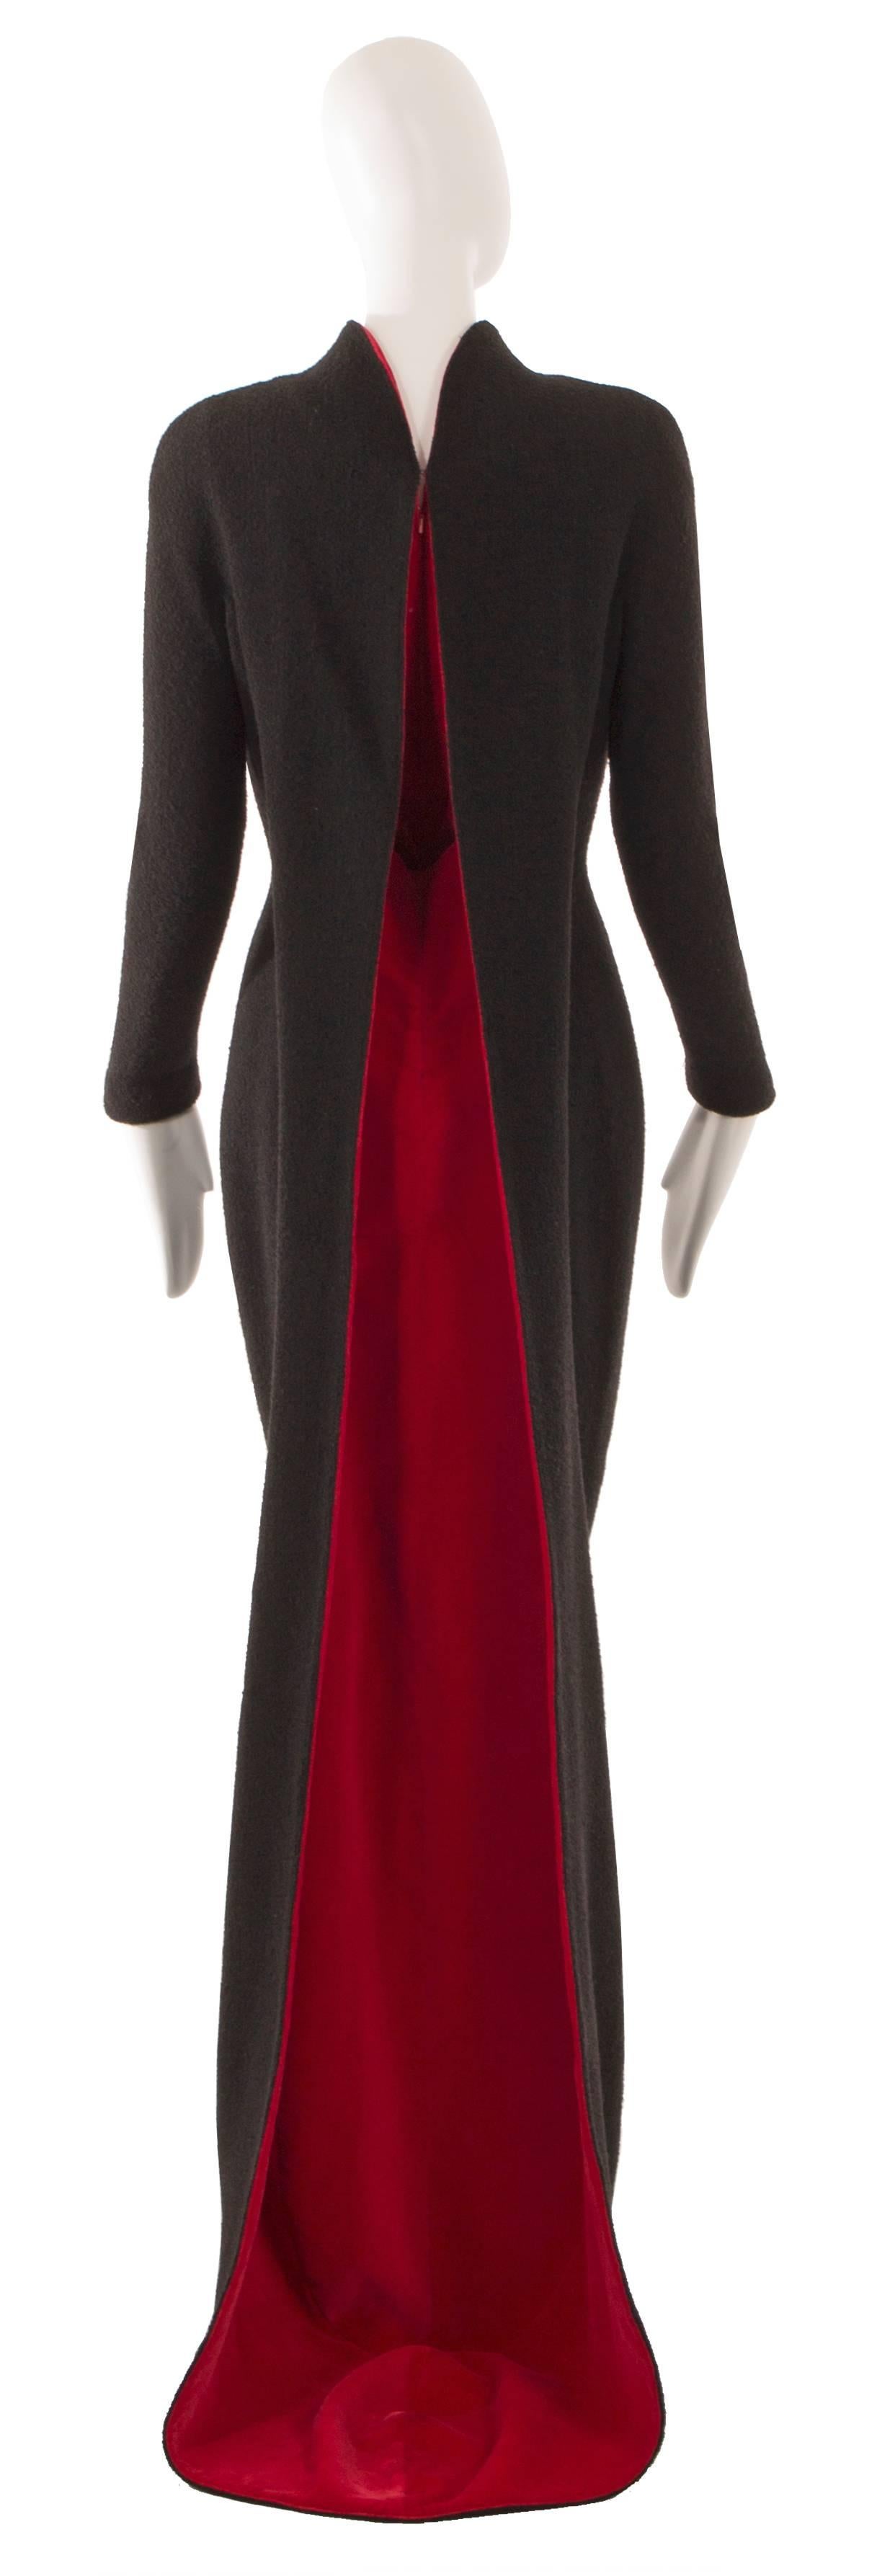 Women's Thierry Mugler black wool and red velvet gown, circa 1982 For Sale